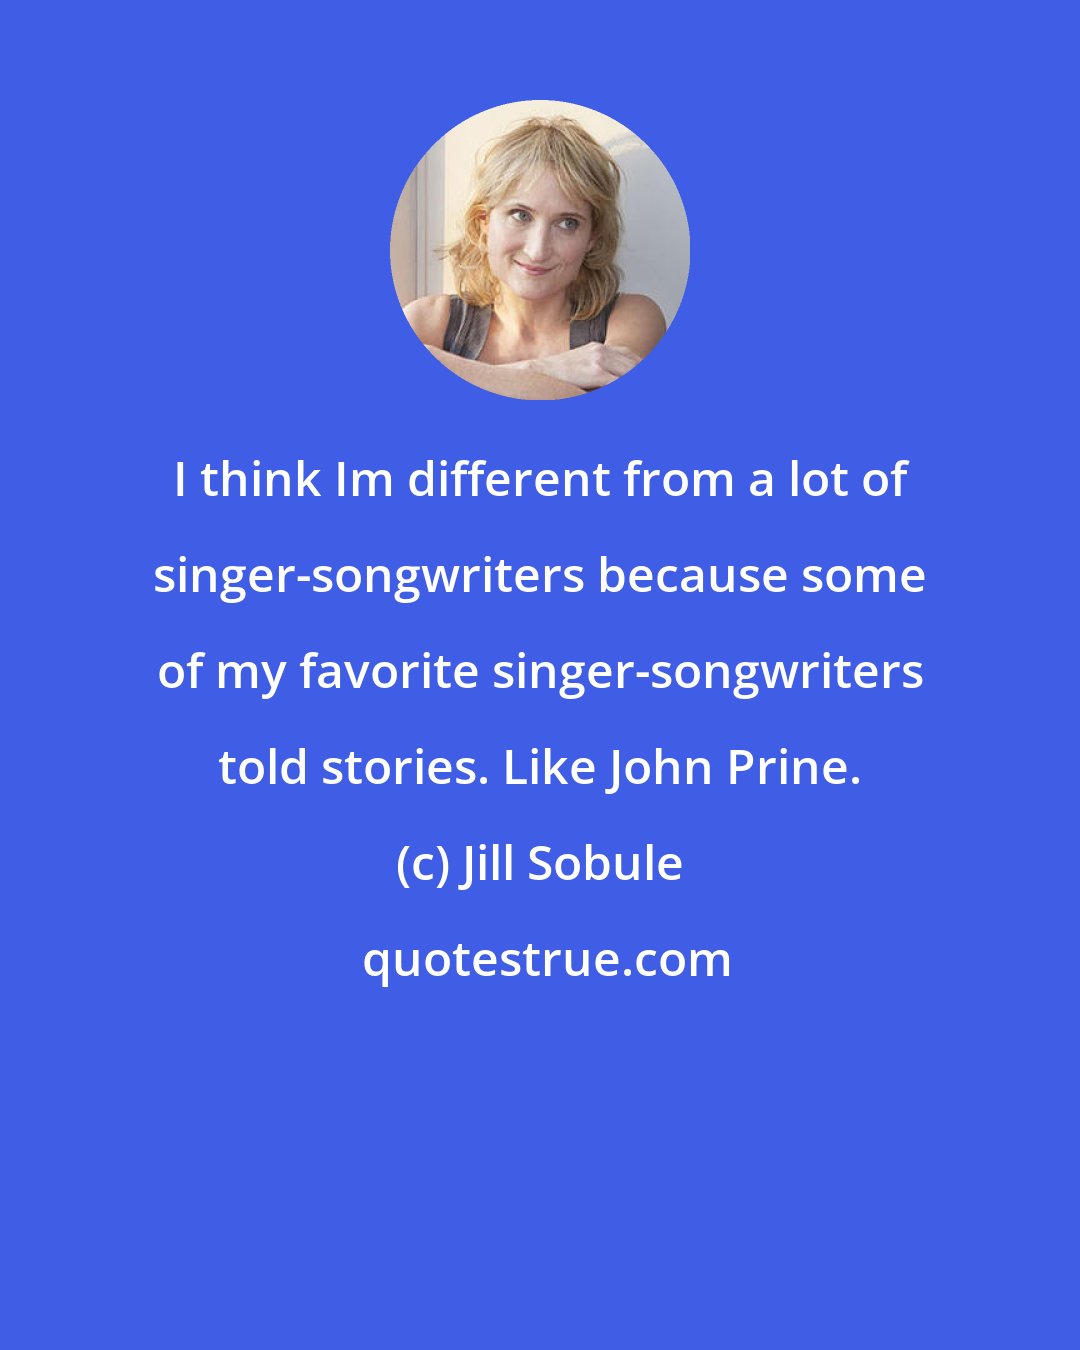 Jill Sobule: I think Im different from a lot of singer-songwriters because some of my favorite singer-songwriters told stories. Like John Prine.